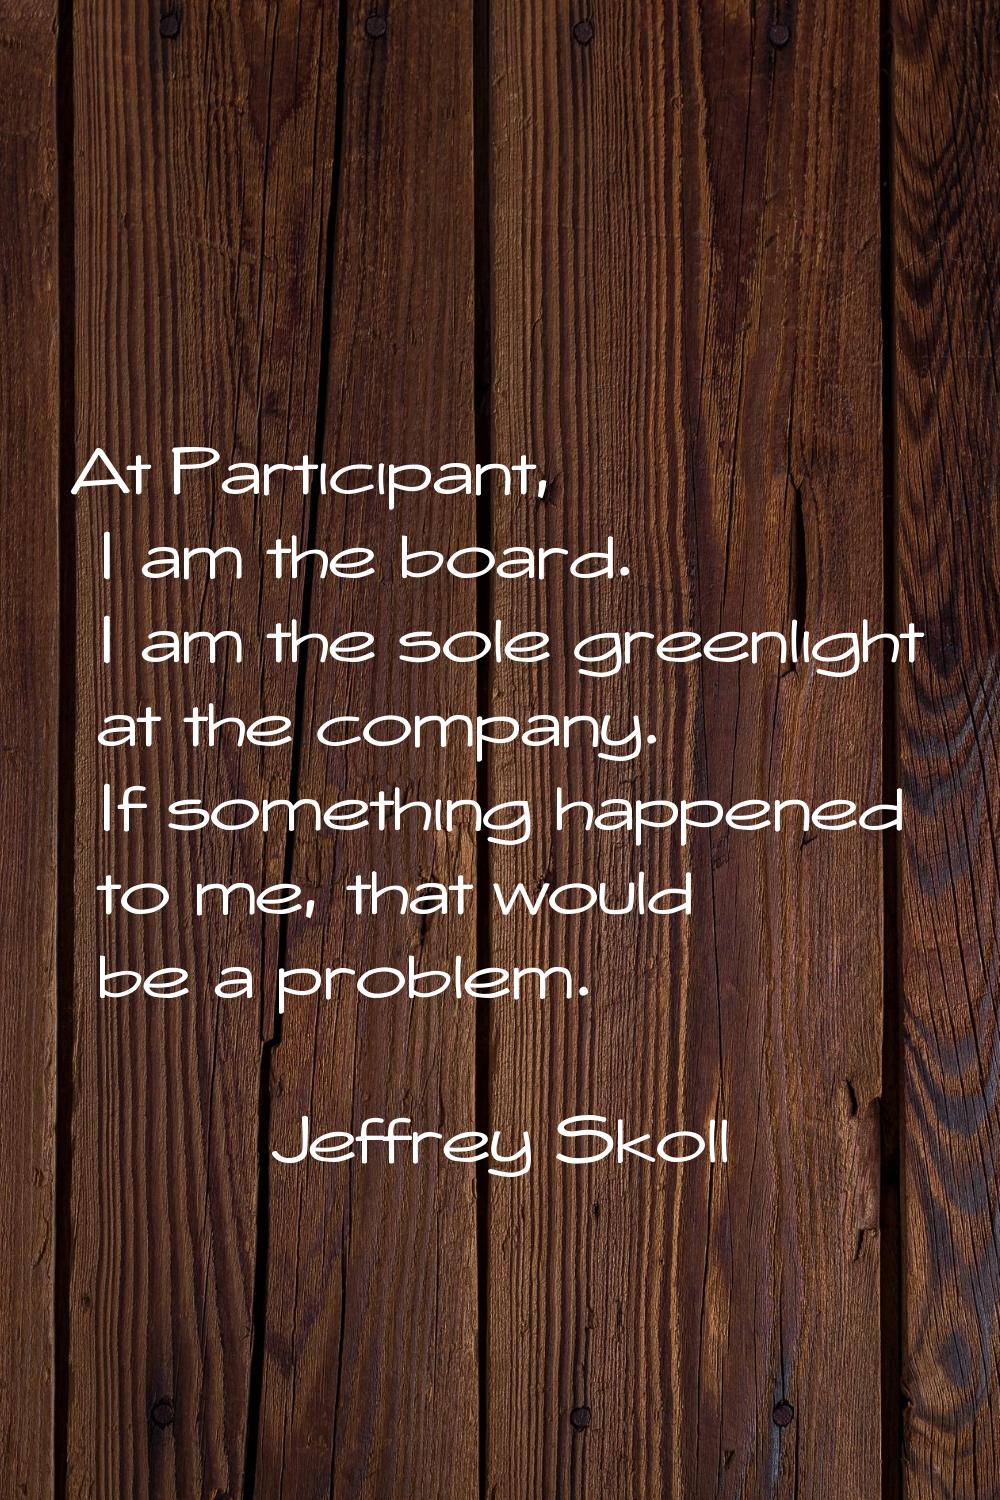 At Participant, I am the board. I am the sole greenlight at the company. If something happened to m